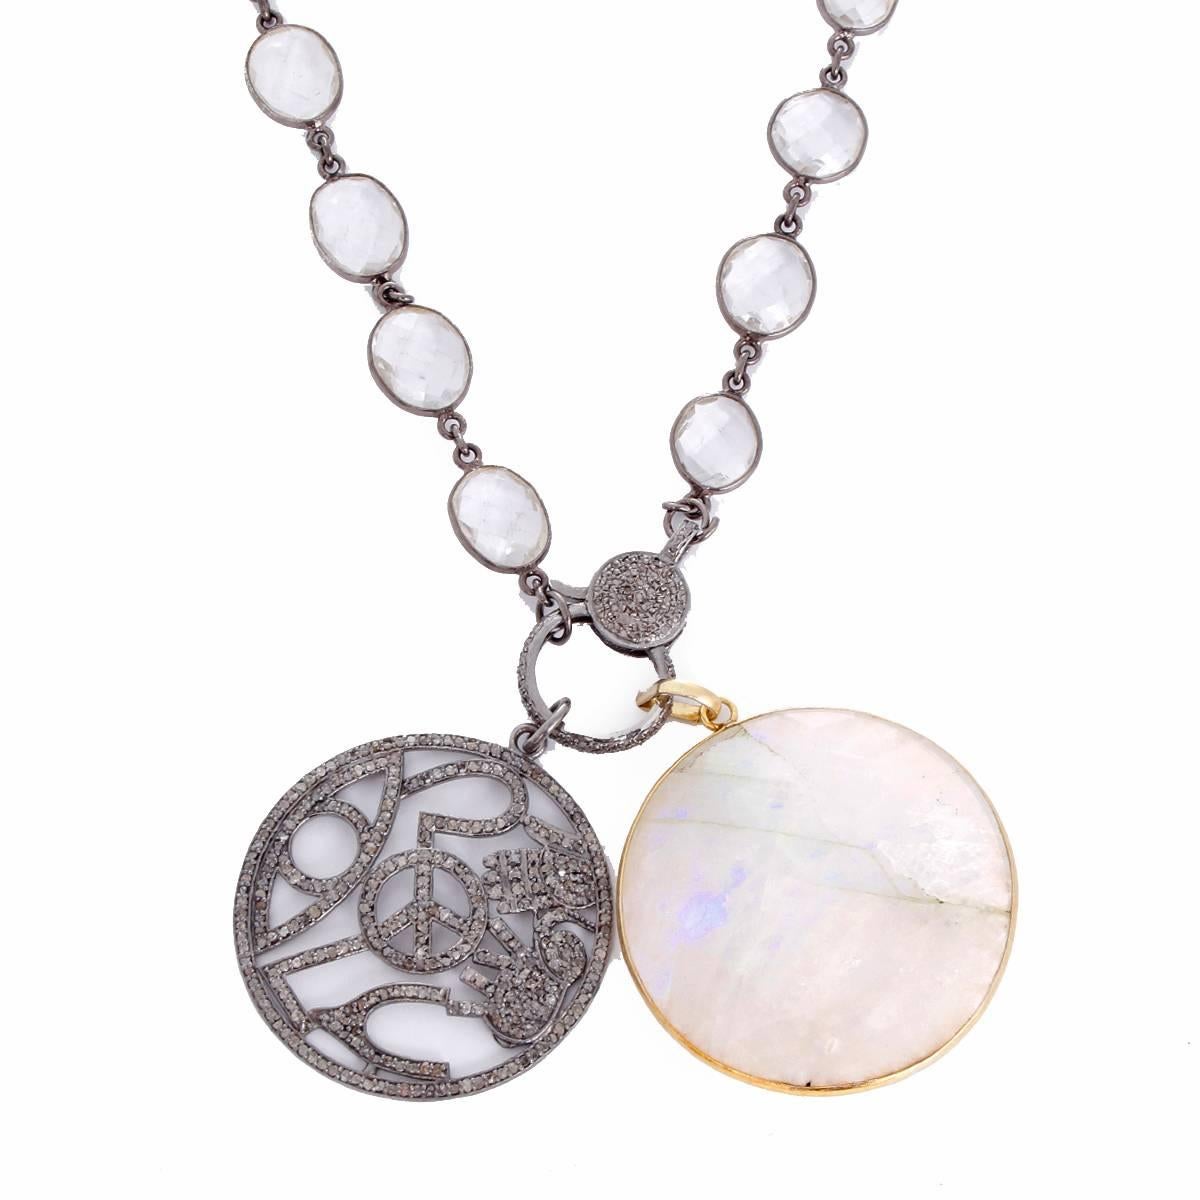 This beautiful necklace features a diamond, moonstone pendant with a diamond clasp on a clear quartz chain. Pendants measure apx. 2-1/8 inches in length at the longest point on a 34-inch chain. Total weight is 74.6 grams.